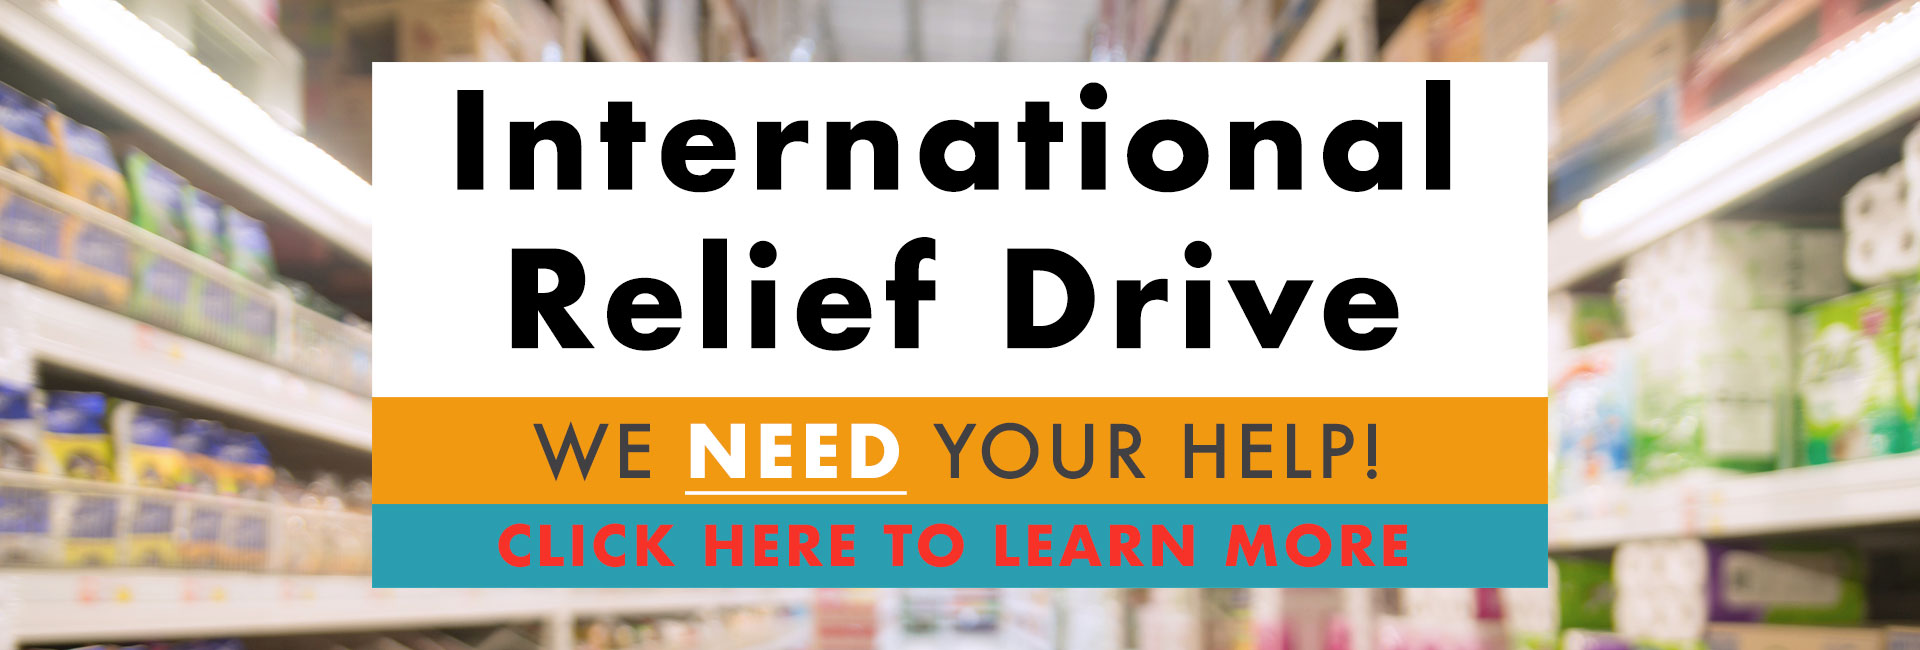 We NEED your help. Everyday is the right time to contribute to the International Relief Drive.